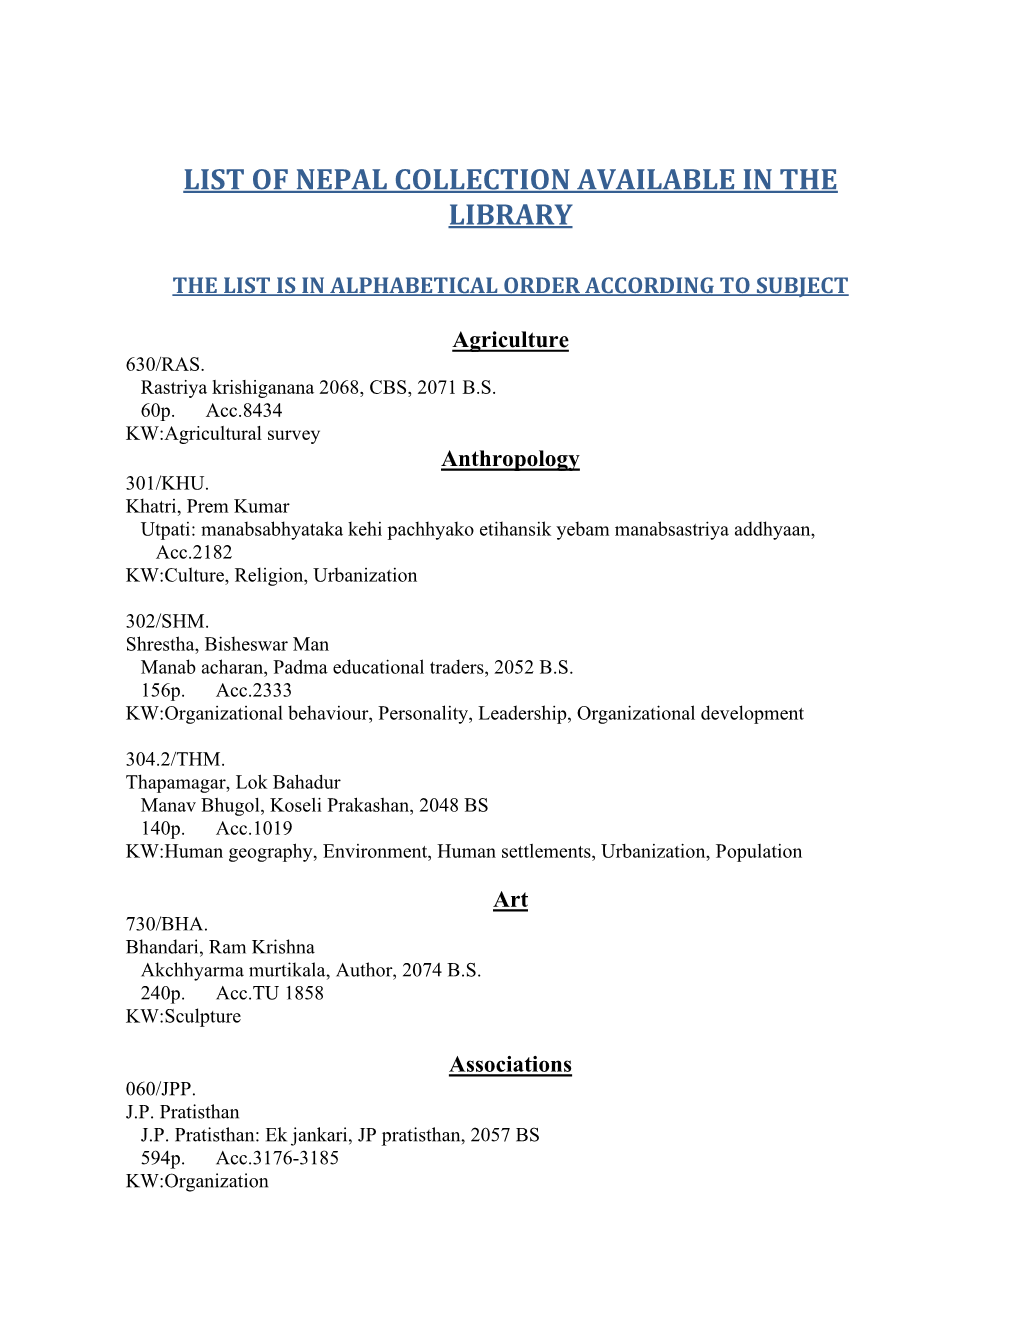 List of Nepal Collection Available in the Library